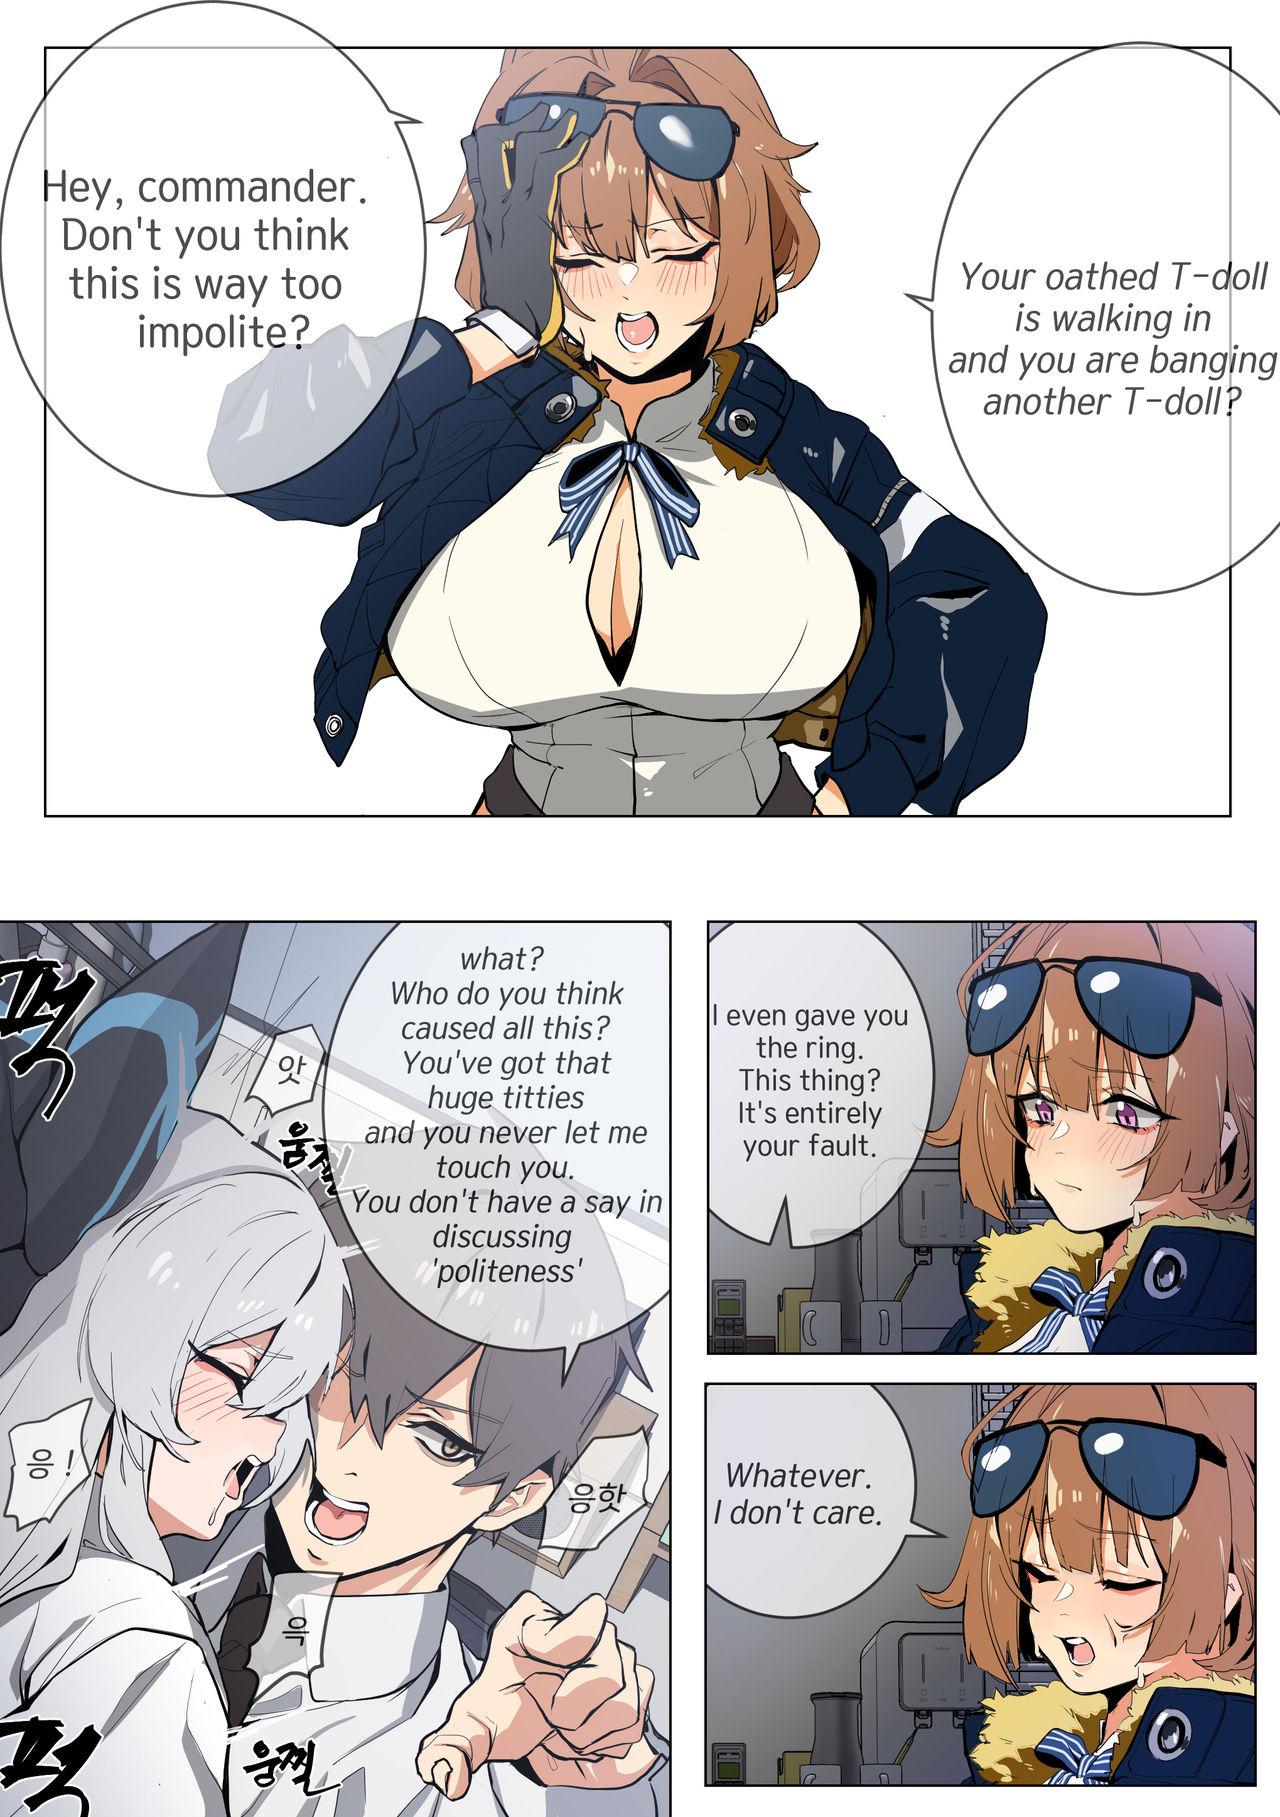 Submission Grizzly - Girls frontline Horny Slut - Page 3